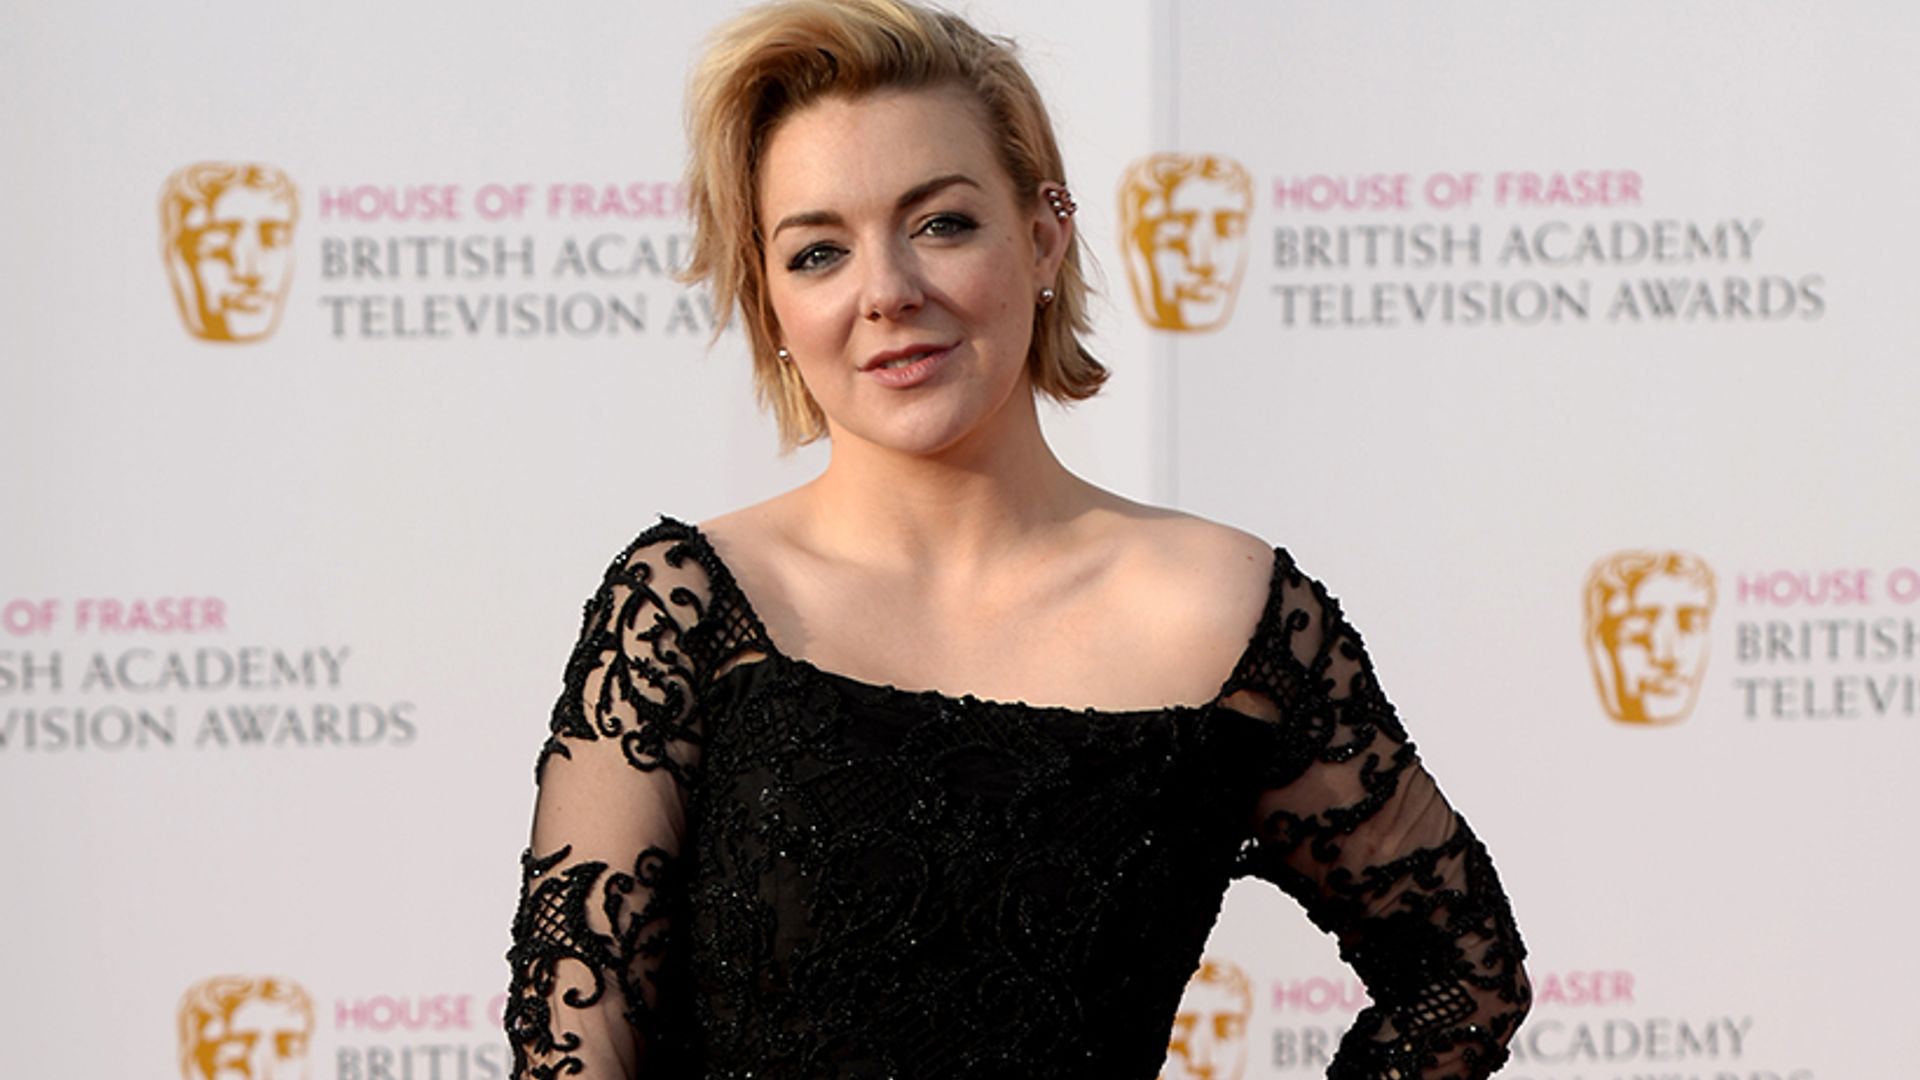 Sheridan Smith returning to TV after turbulent year